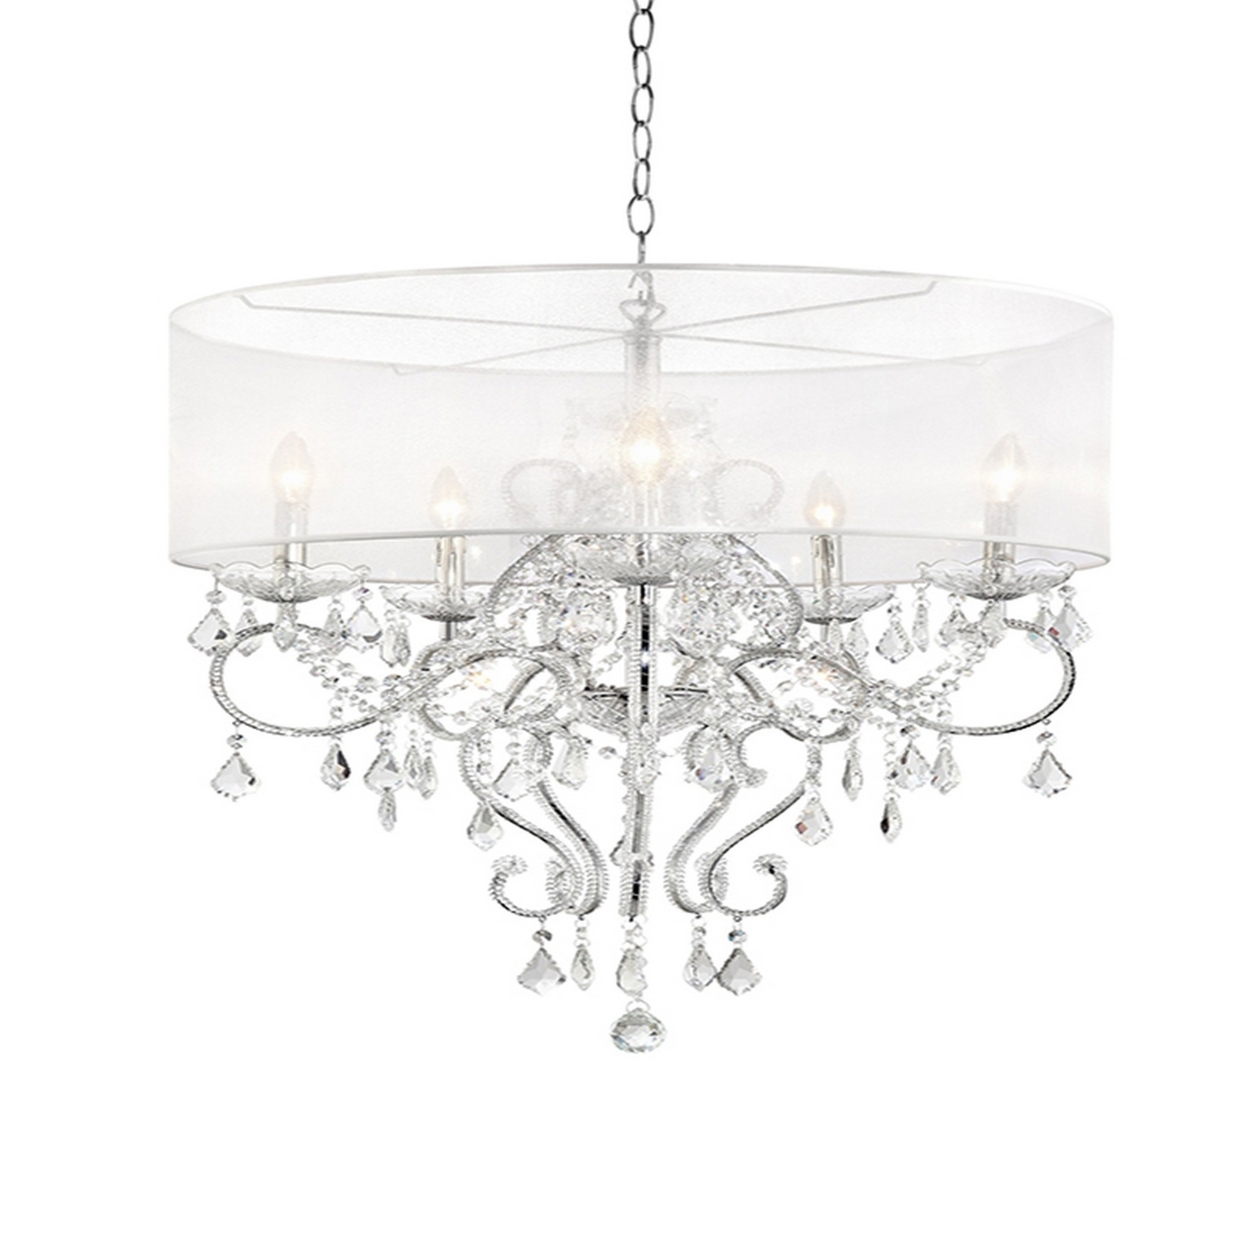 32 Inch Ceiling Lamp With Hanging Crystals, Round Canopy, Silver- Saltoro Sherpi